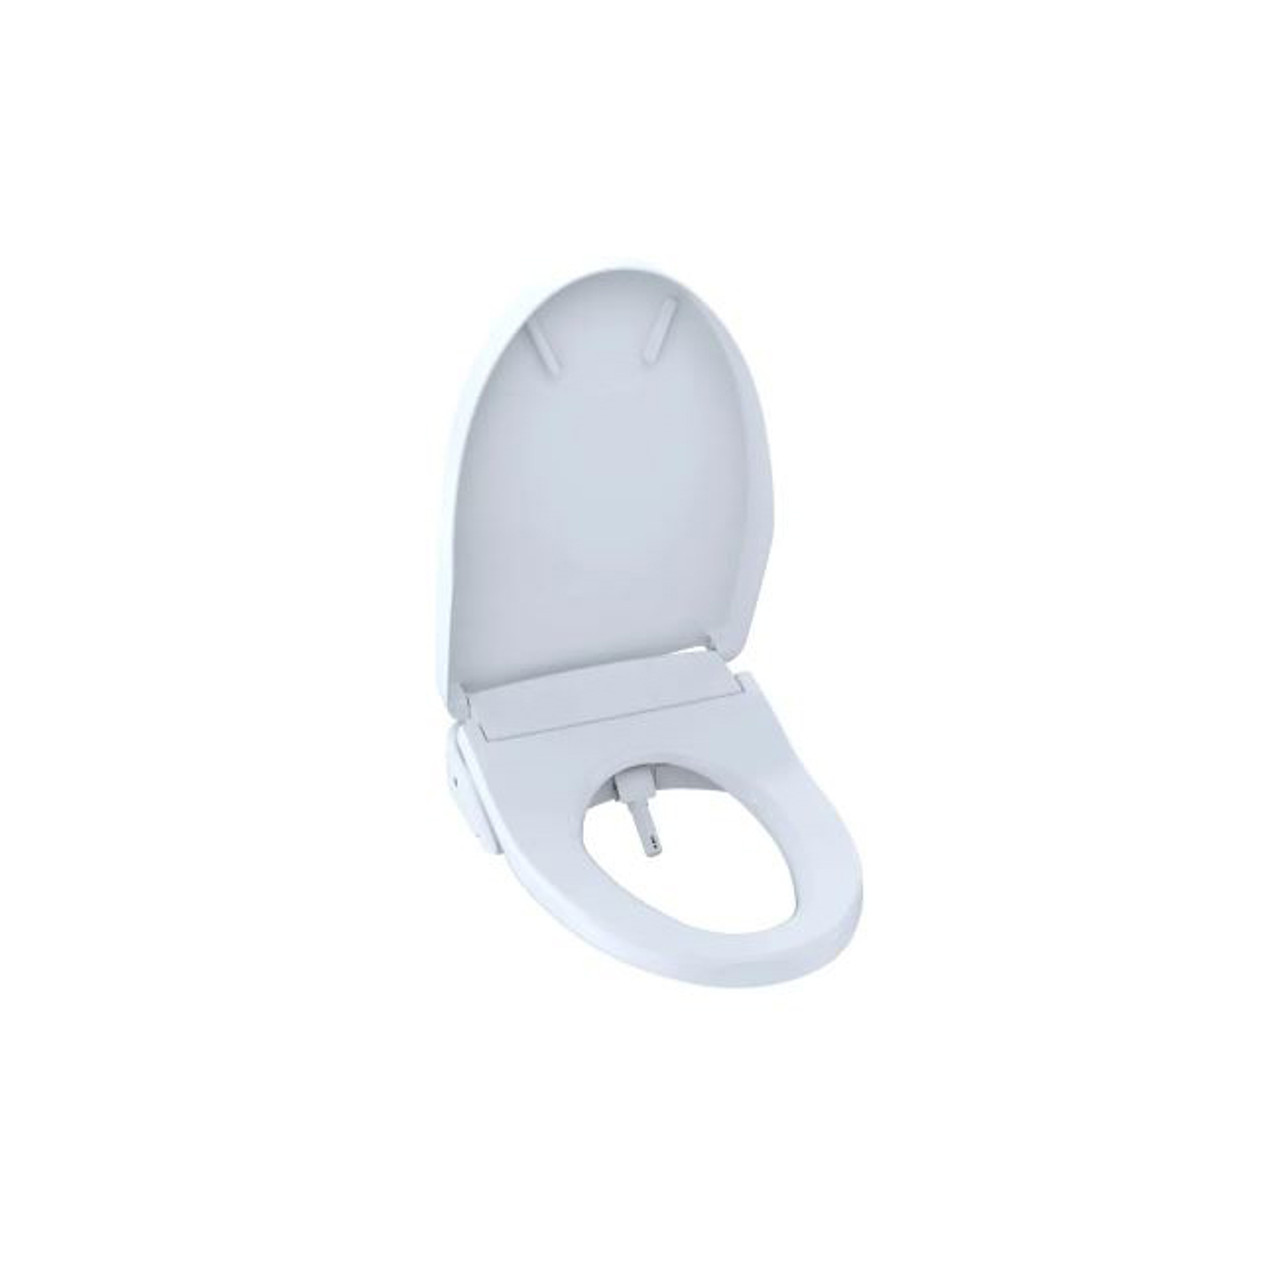 Toto Washlet S550e Elongated Bidet Seat With Heated Seat Remote Ewater Premist Night Light And Auto Open Close